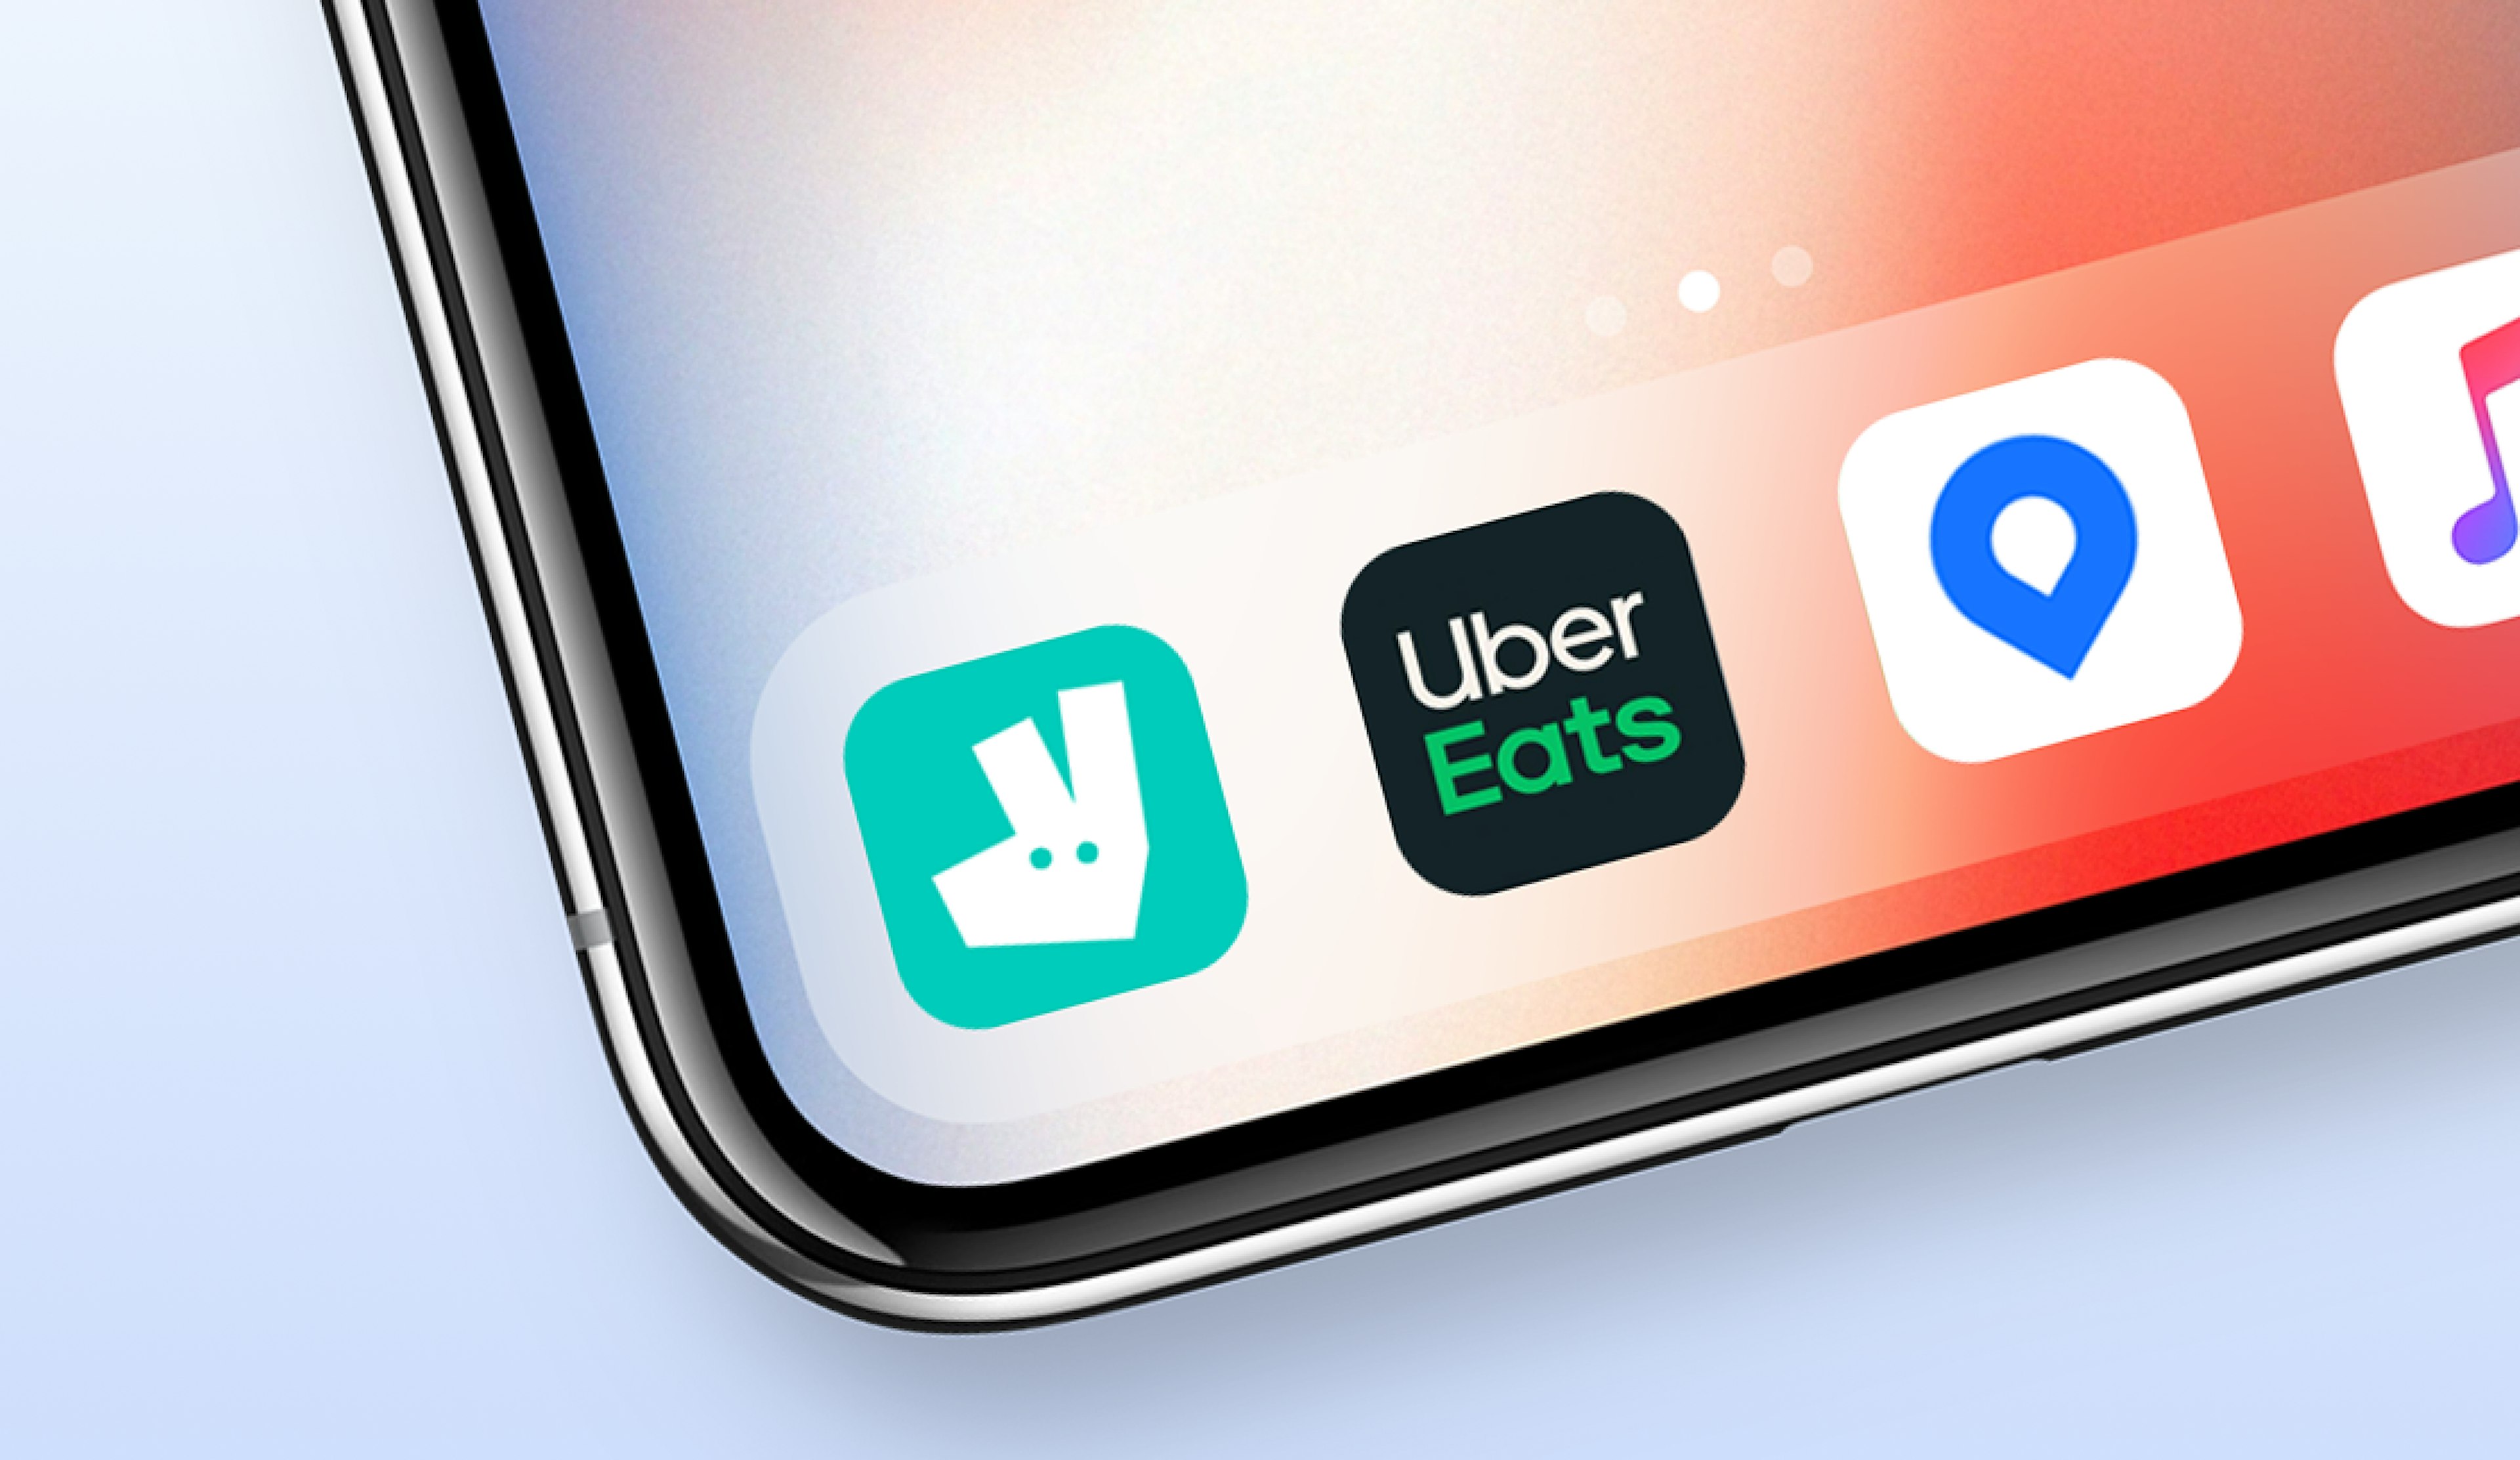 An iPhone with the following apps icons: Deliveroo, Uber Eats, and Circuit